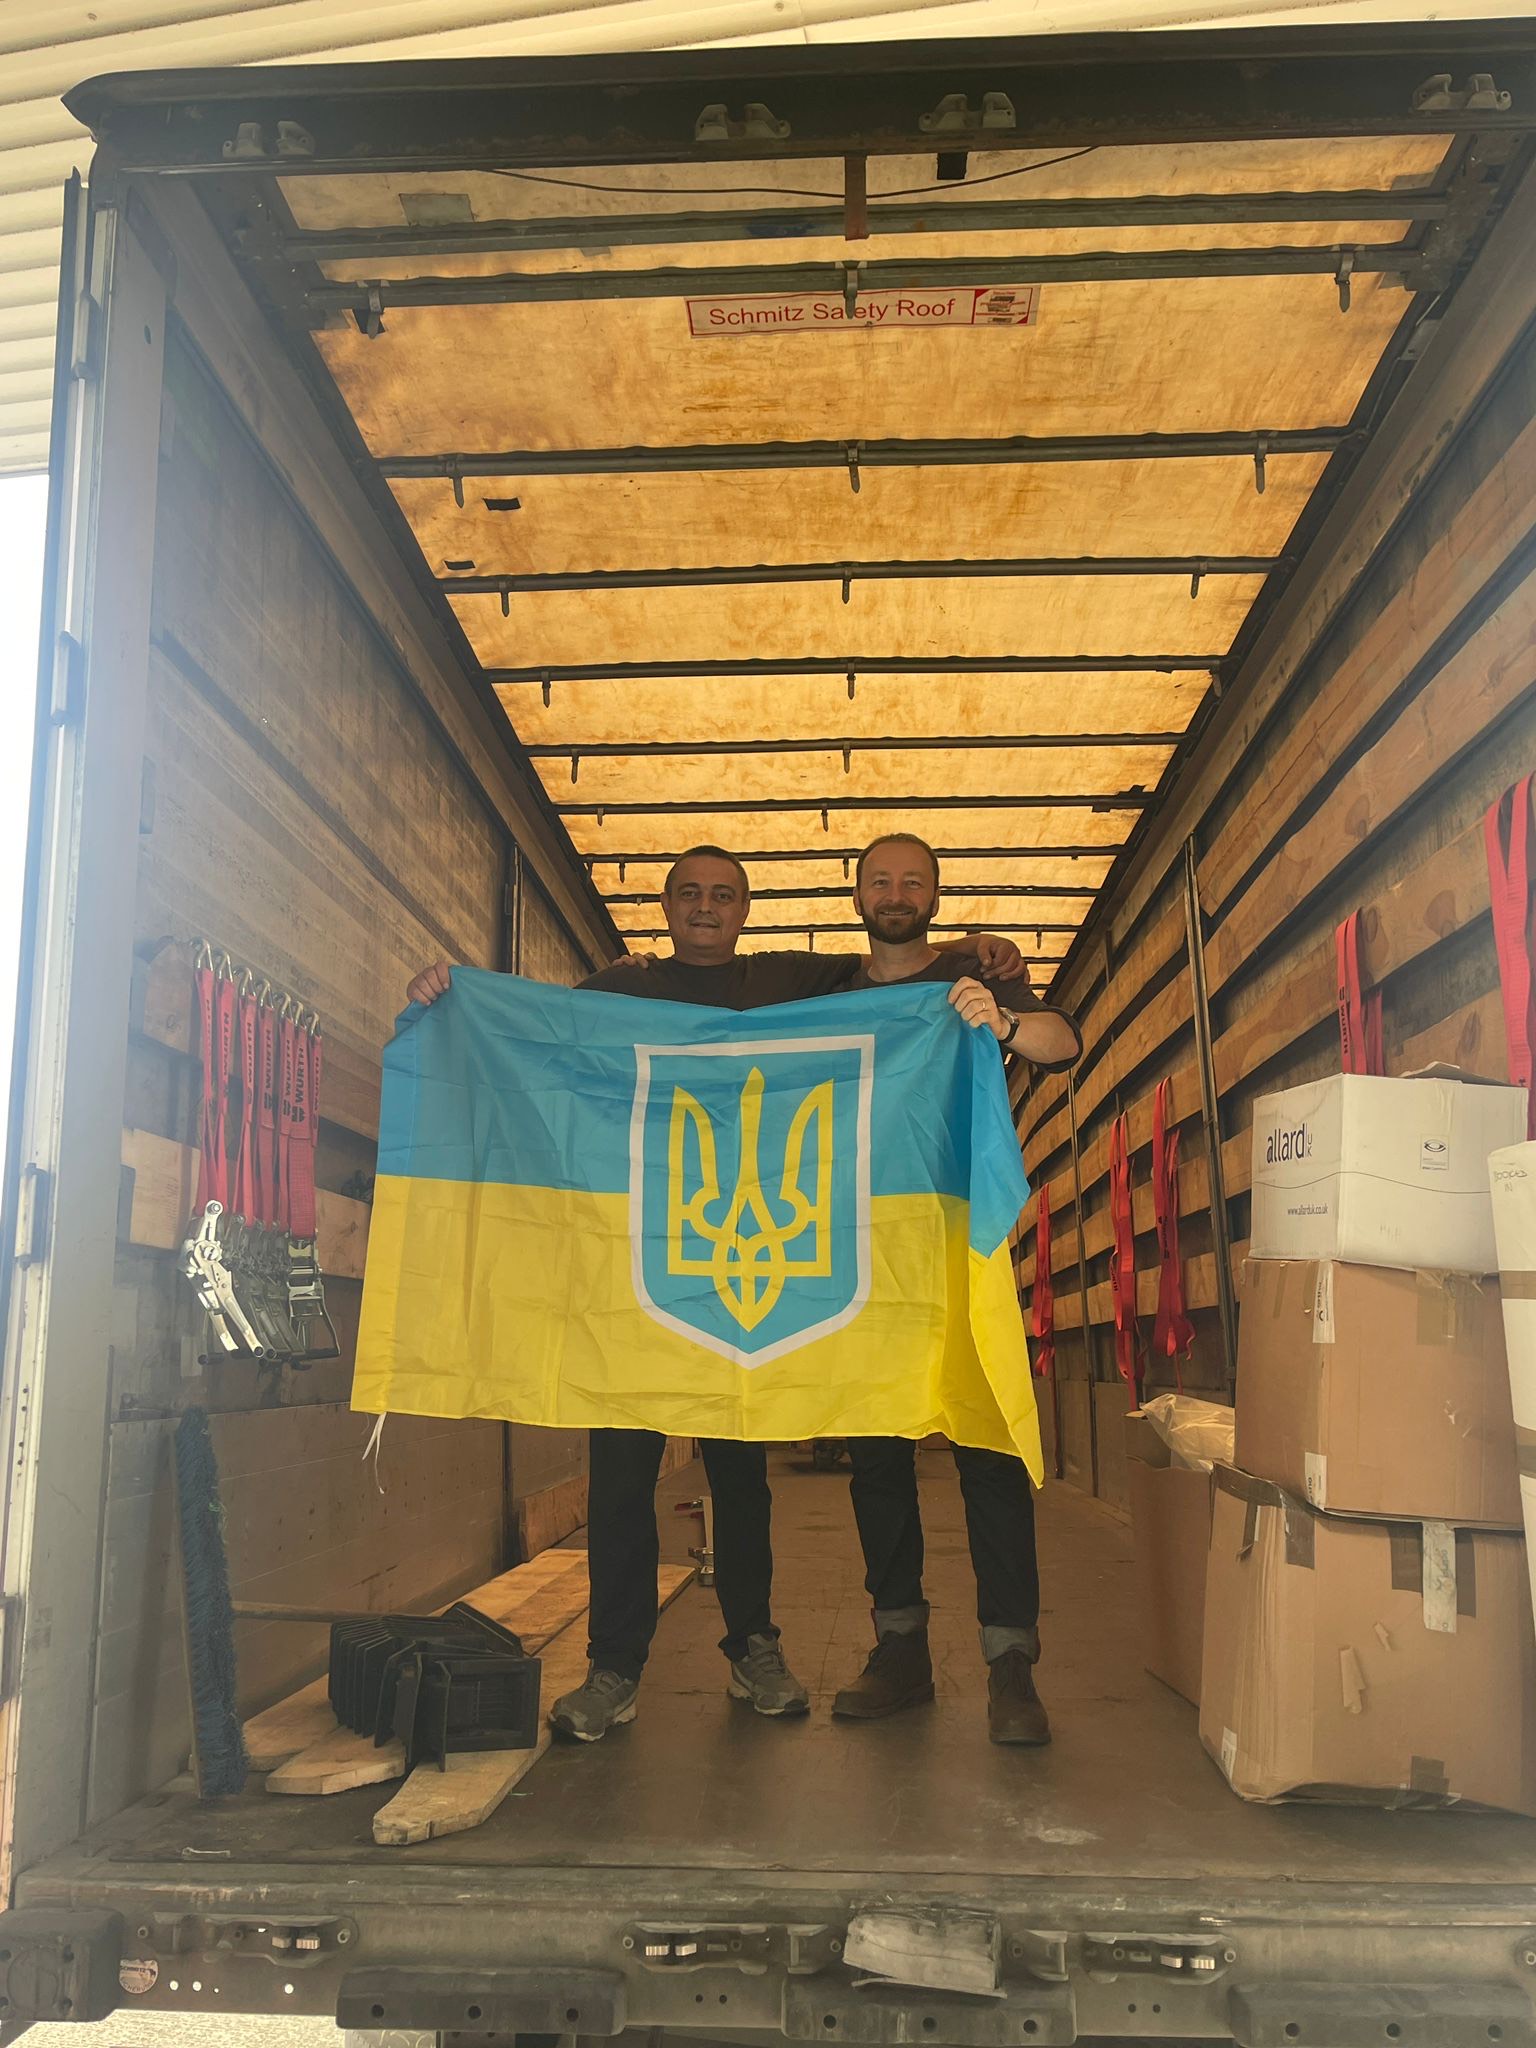 Our Donation to oursupport4ukraine